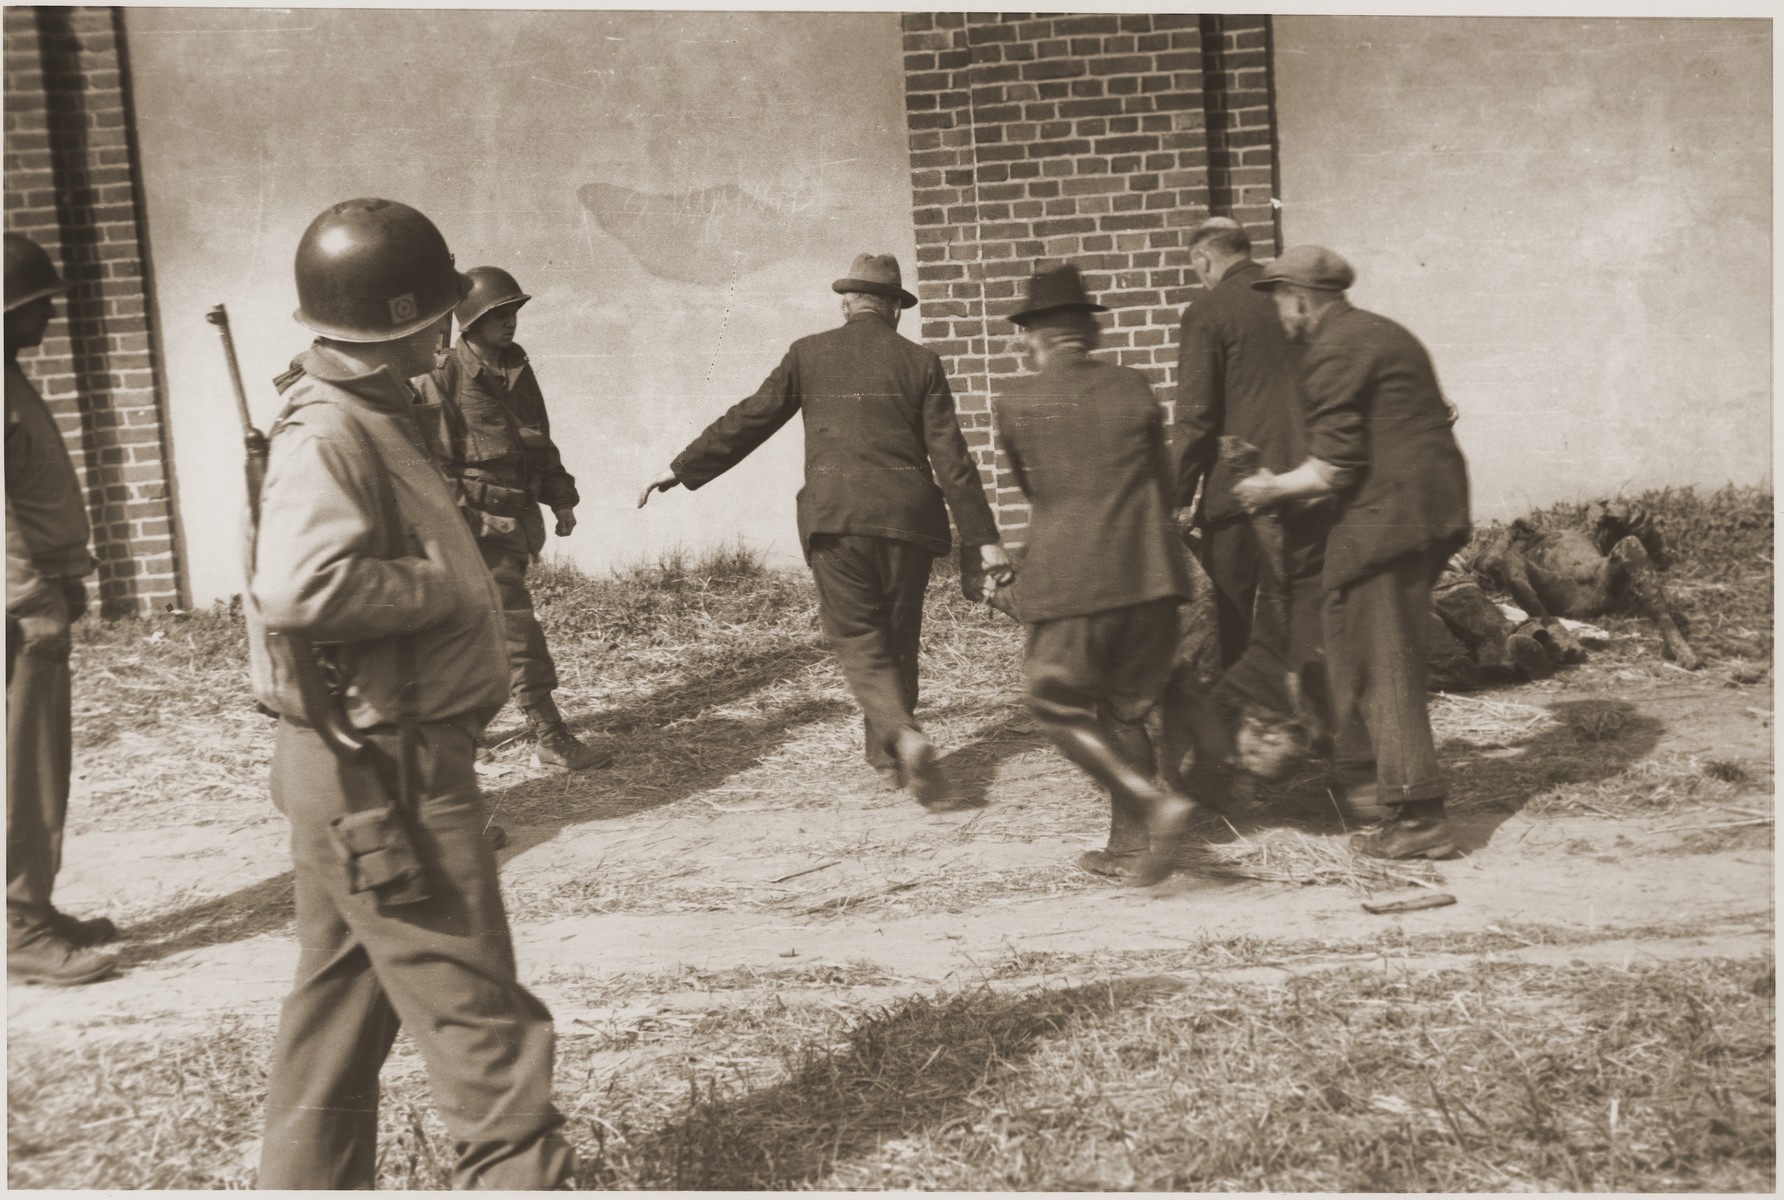 Under the supervision of the Ninth U.S. Army, German civilians are forced to remove the charred corpses of prisoners from a barn outside of Gardelegen for burial in mass graves.